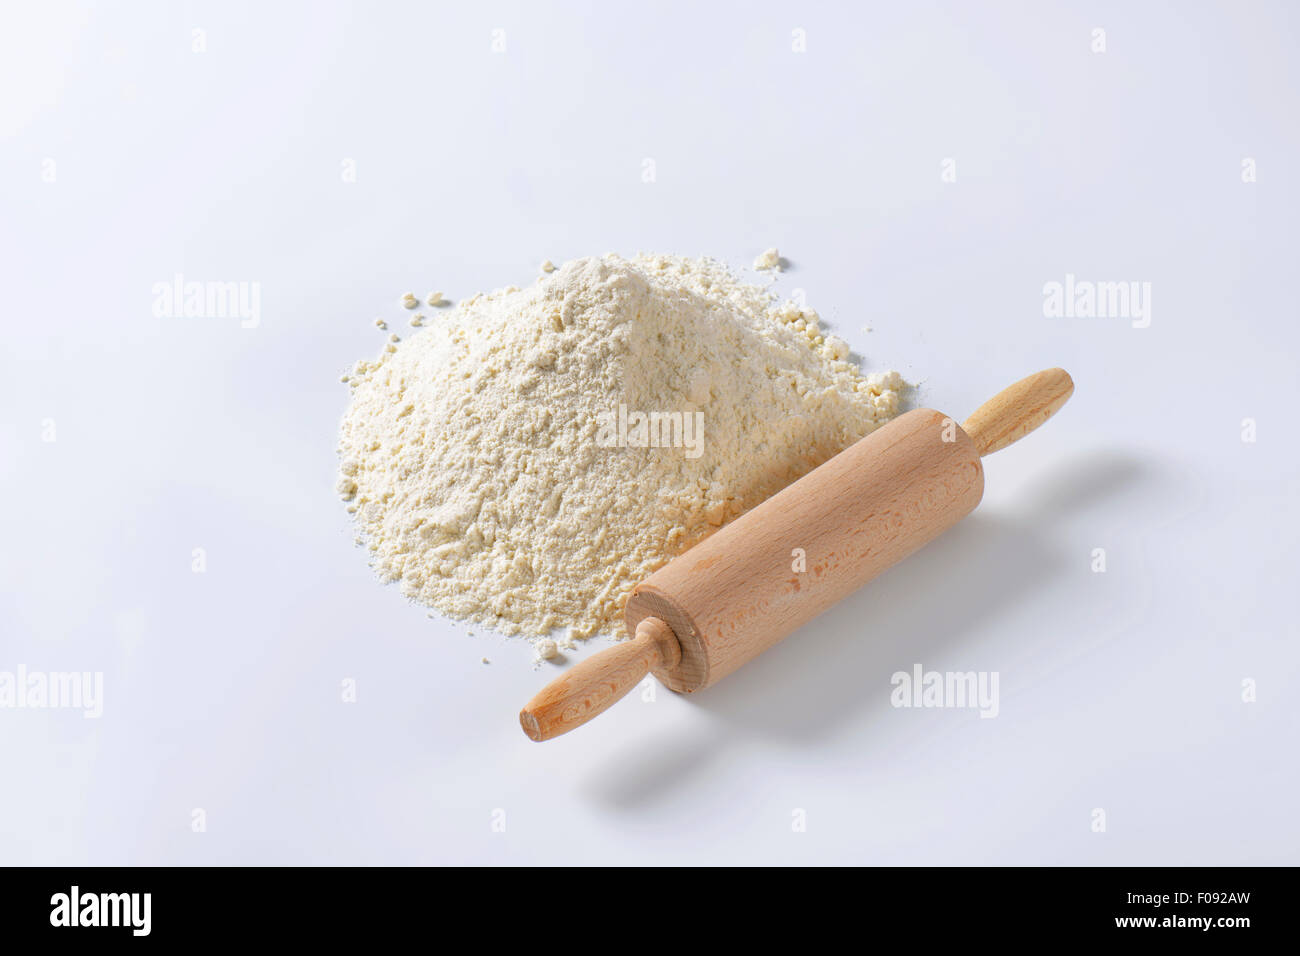 Wooden 'roller' type rolling pin and pile of finely ground flour Stock Photo